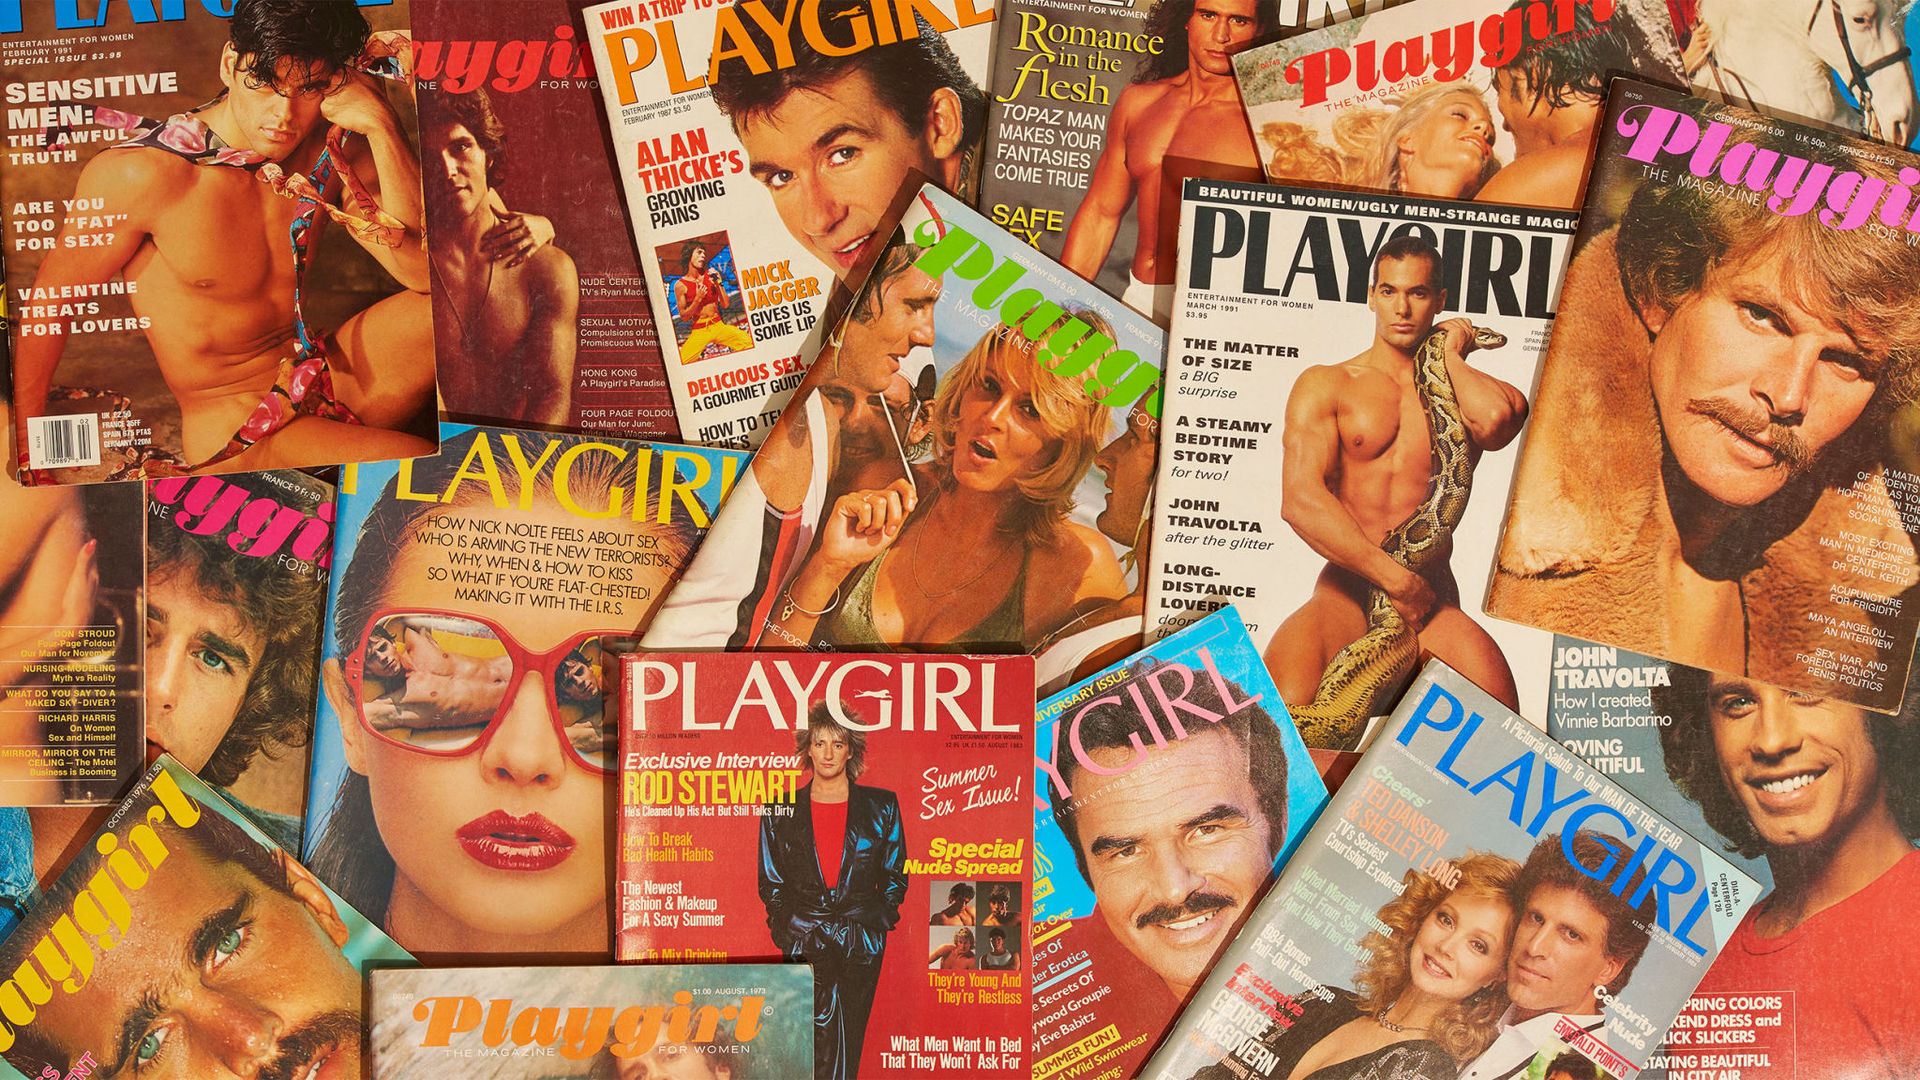 Small Cook Sex Video Download - History of Playgirl Magazine - How Playgirl Normalized Male Nudity